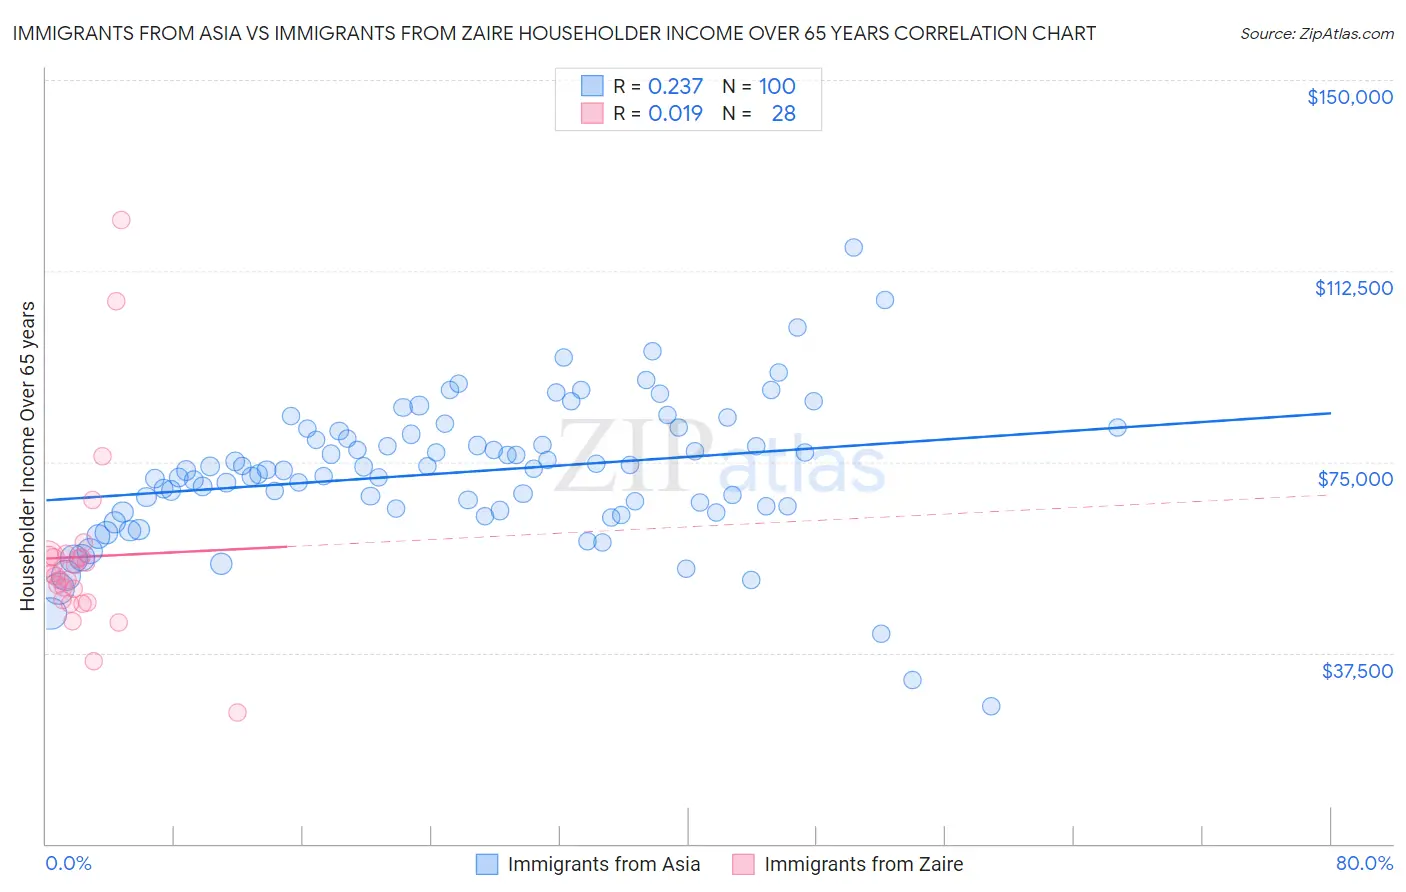 Immigrants from Asia vs Immigrants from Zaire Householder Income Over 65 years